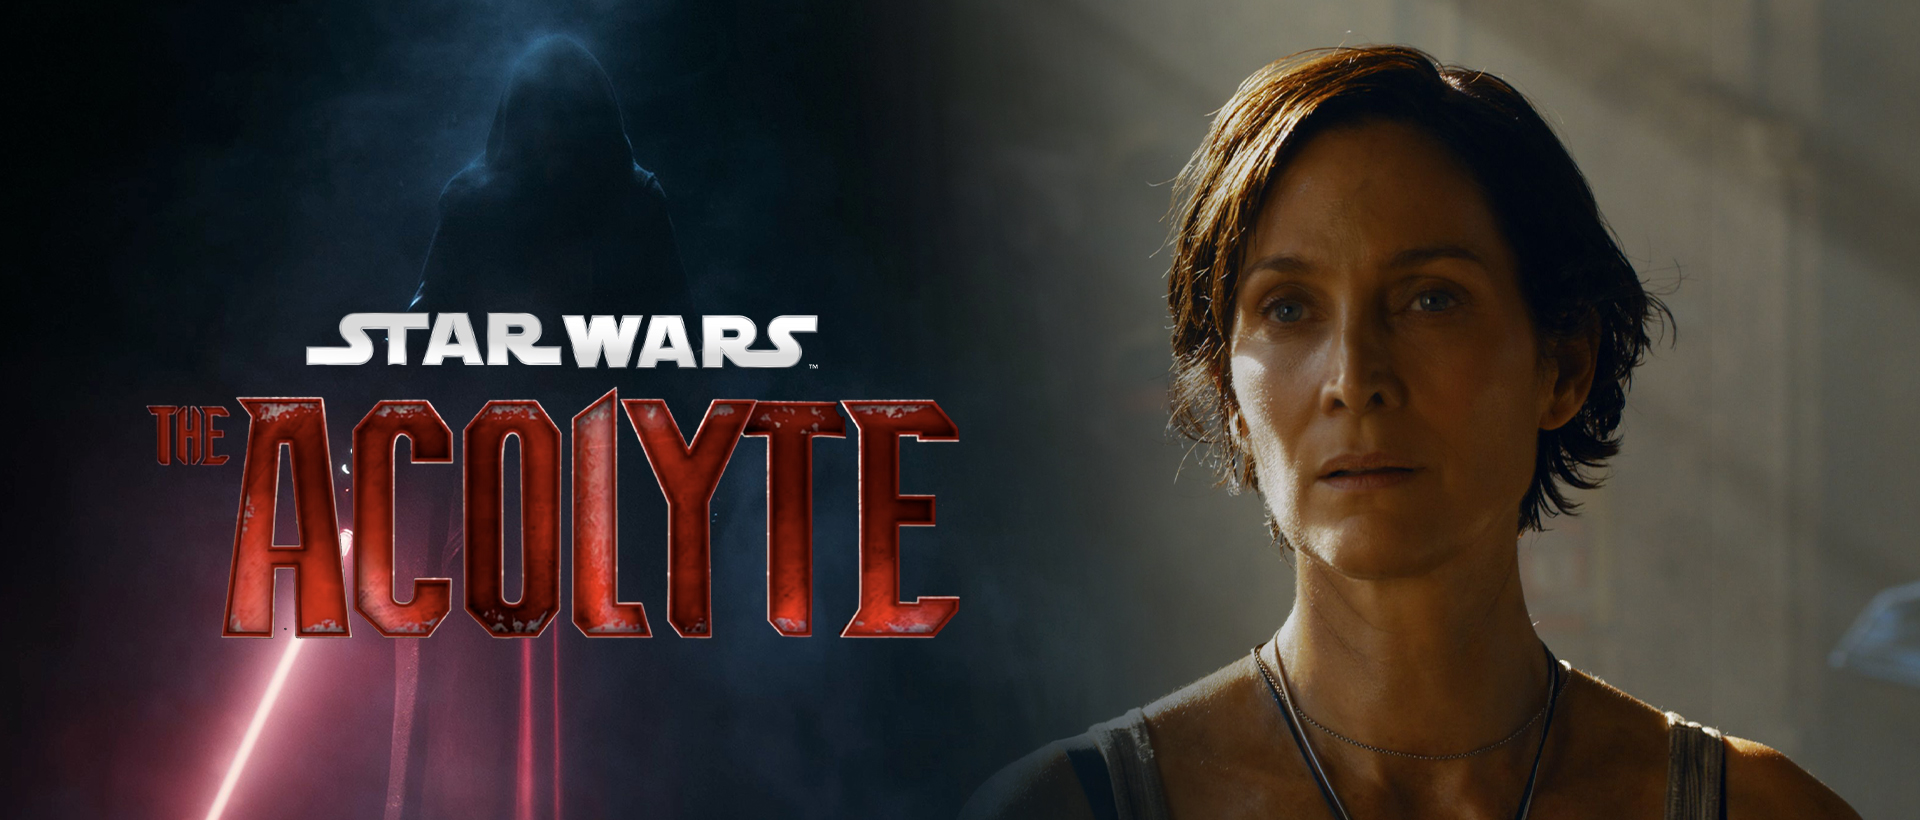 carrie ann moss star wars the acolyte banner